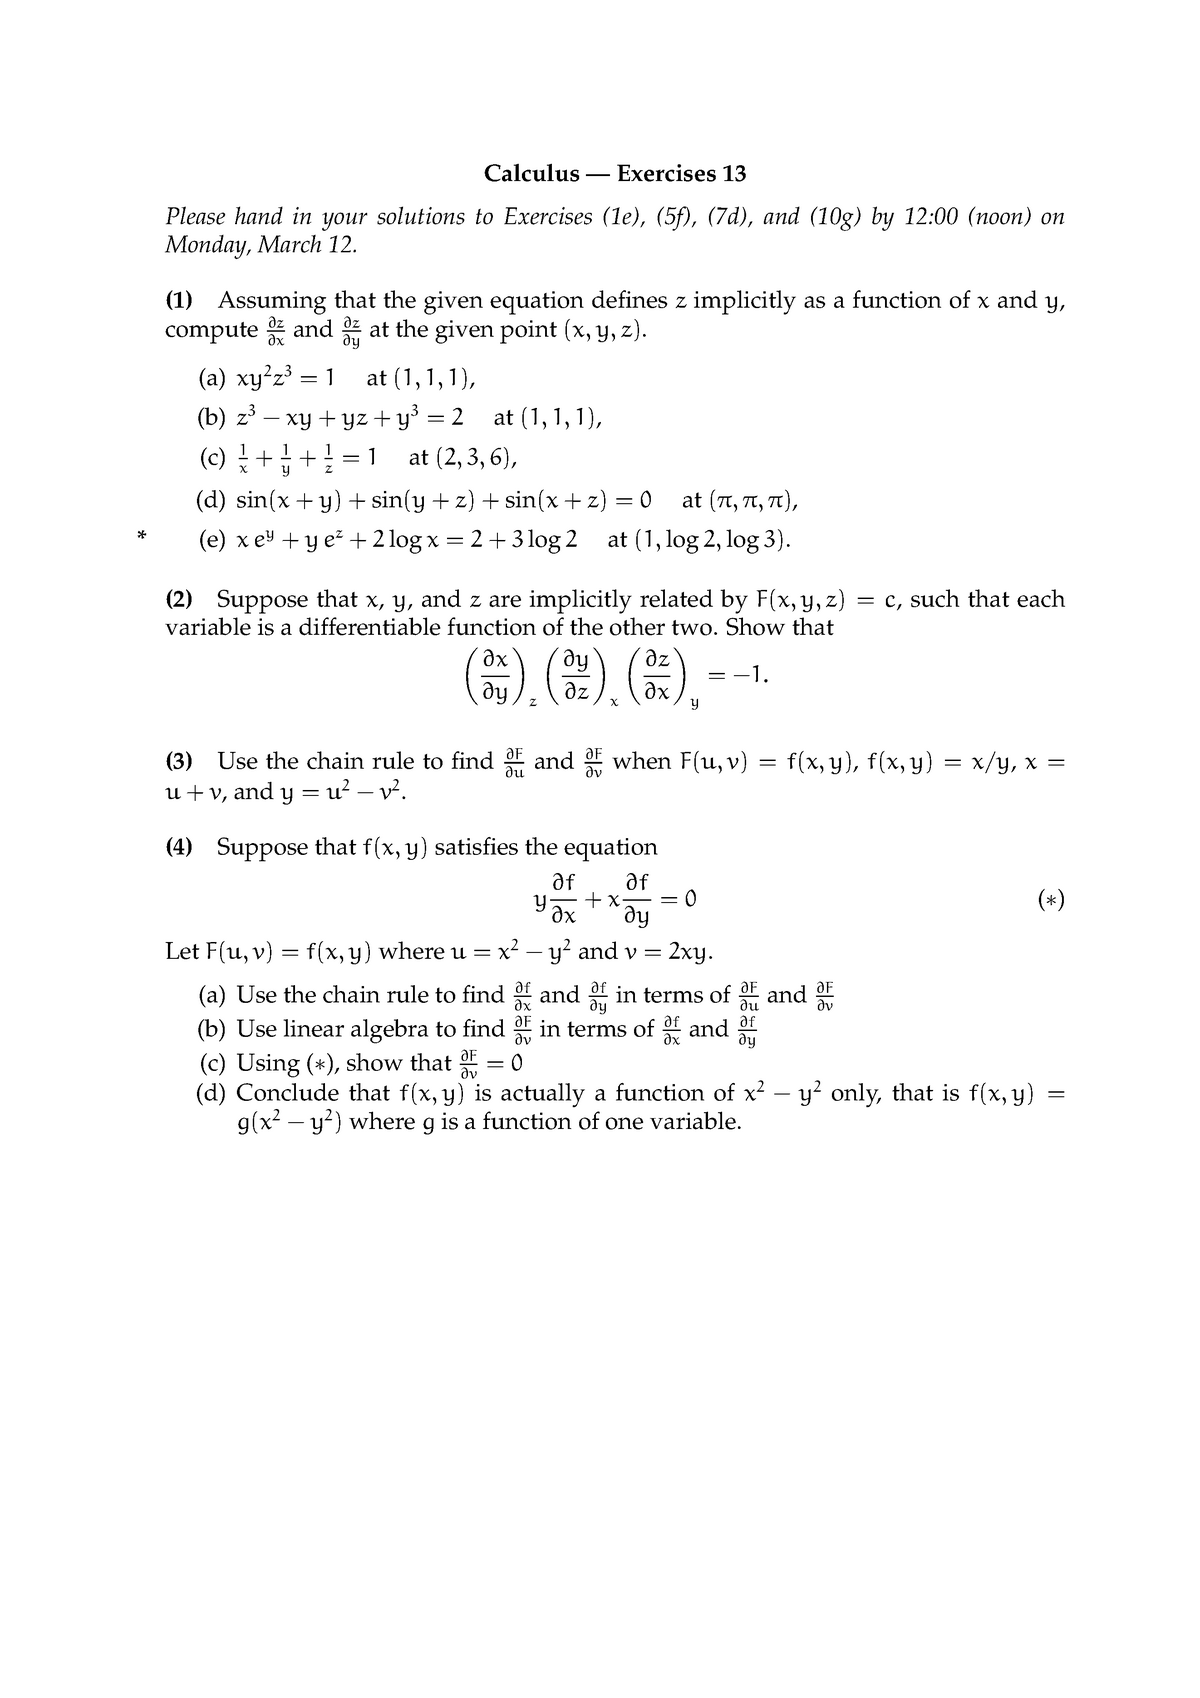 Calculus Assessment 13 Question Sheet Calculus Exercises 13 Please Hand In Your Studocu